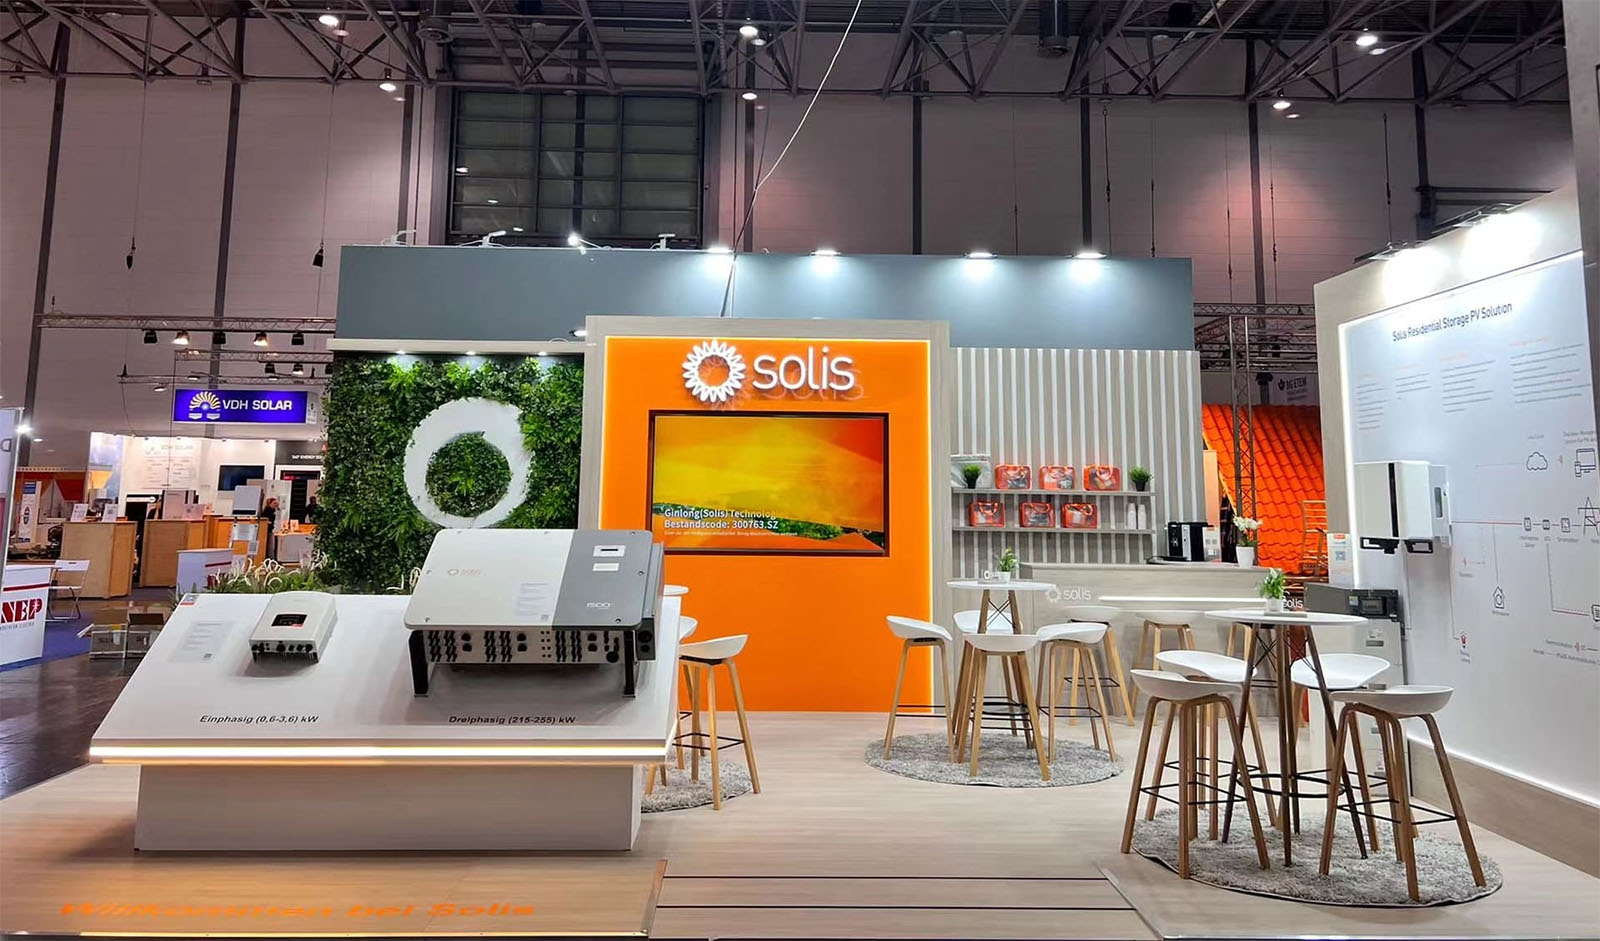 Solis introduces new Sixth Generation 3 phase hybrid inverter - PV Tech